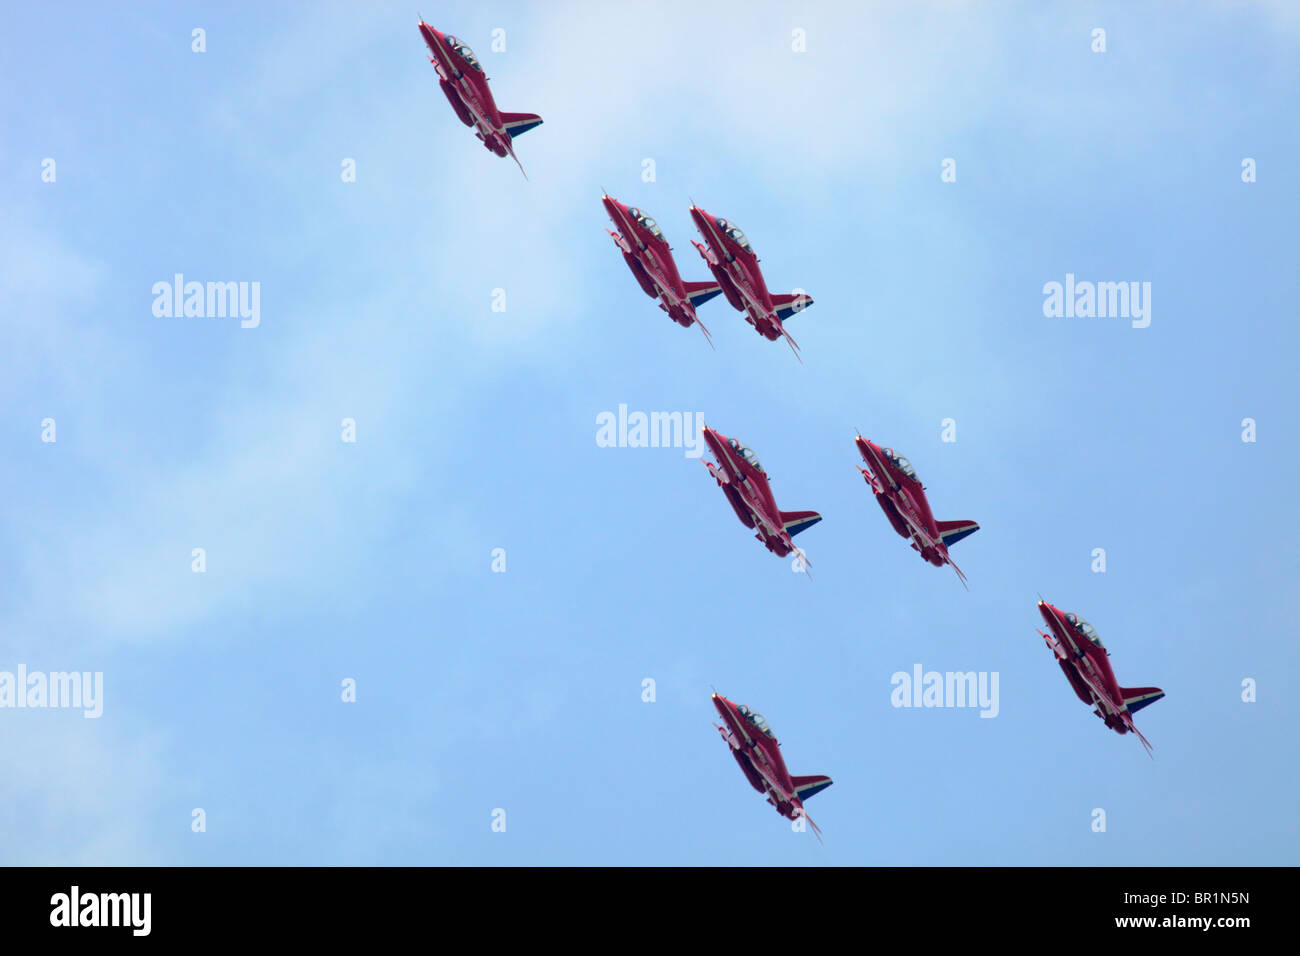 Hawk jets of the RAF Red Arrows display team in formation Stock Photo